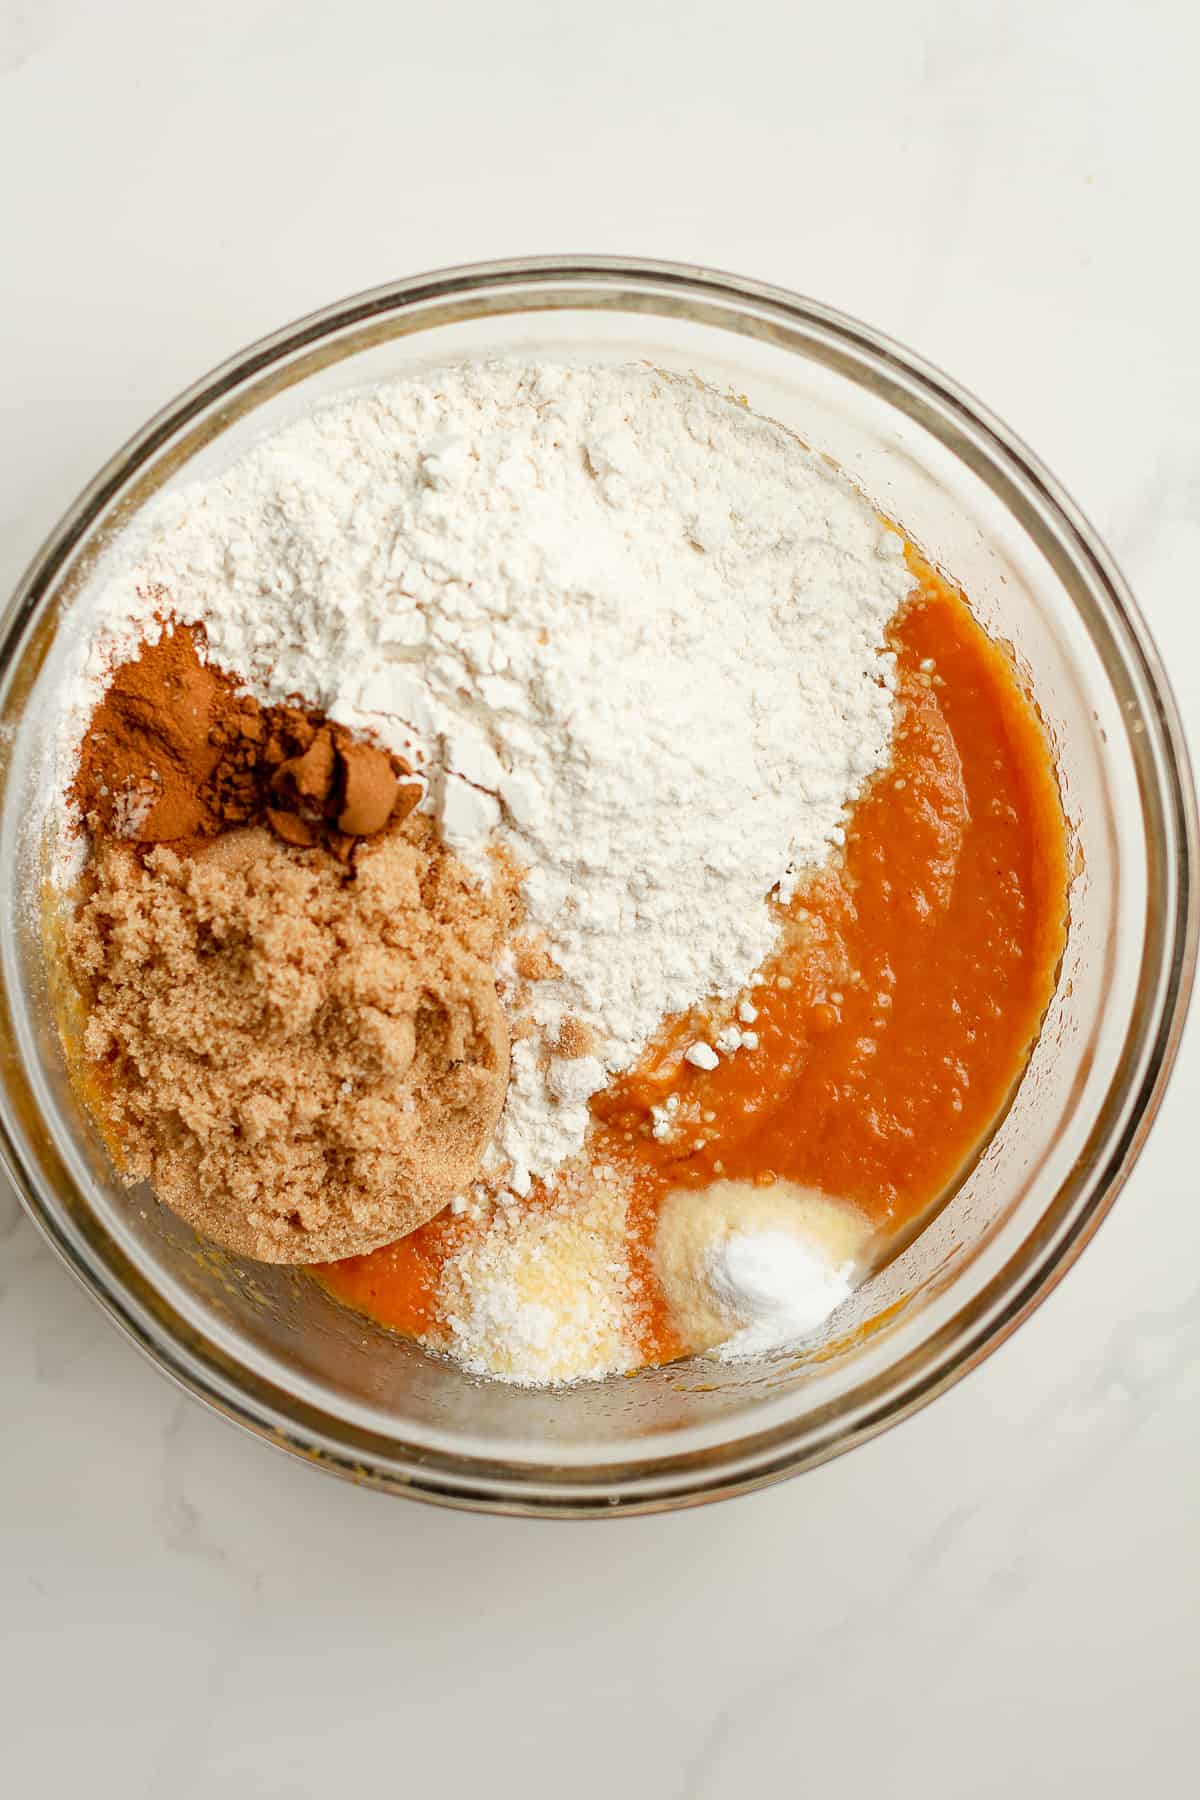 A bowl of the pumpkin batter plus the dry ingredients.